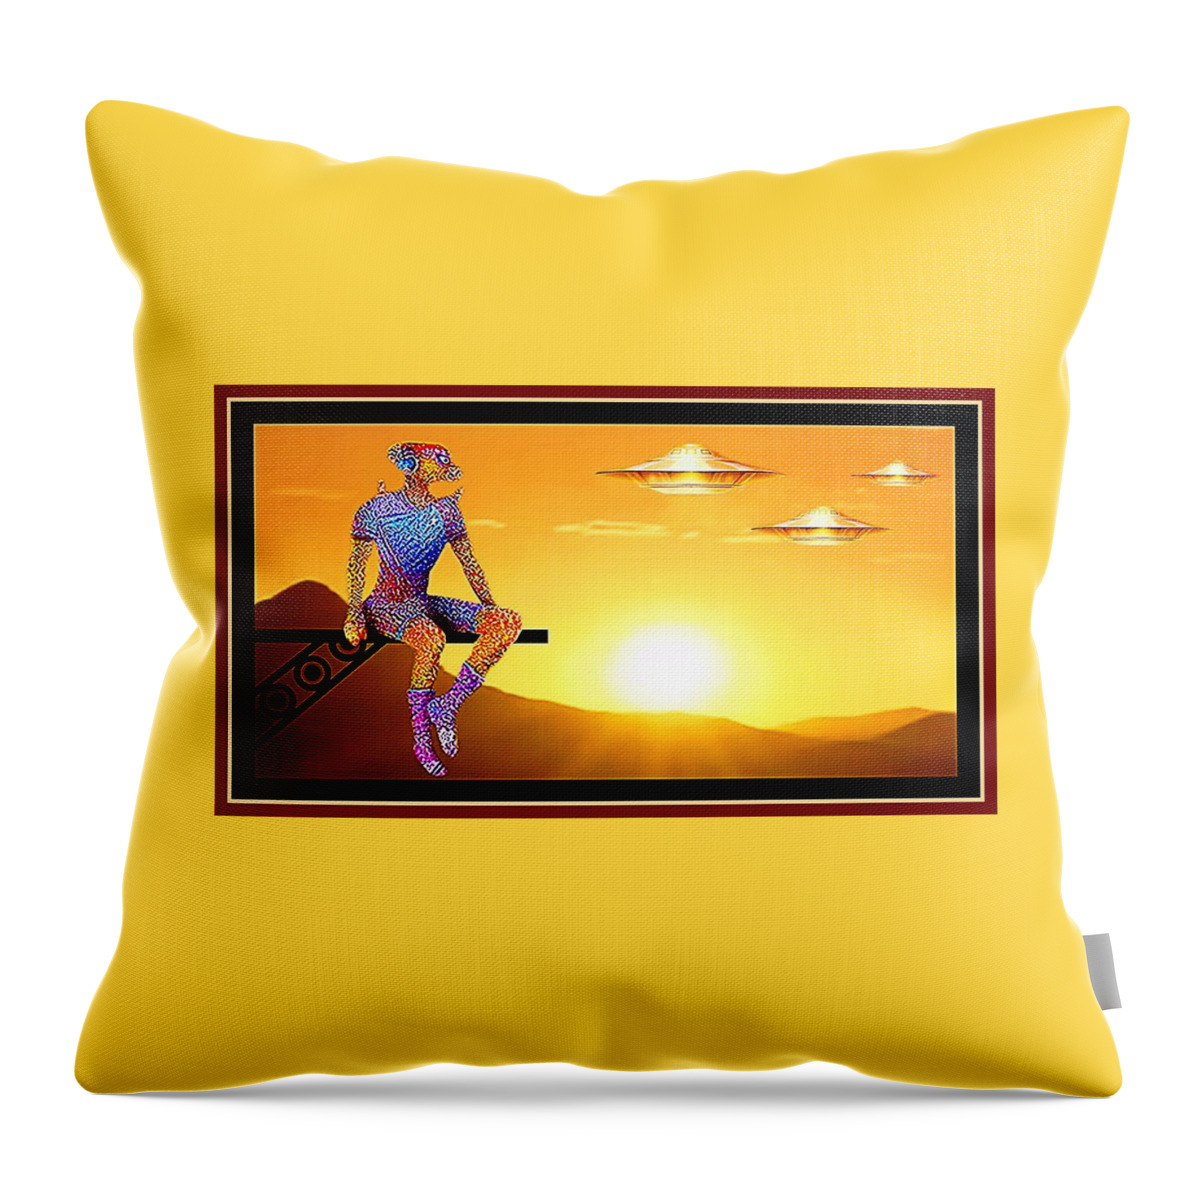 Sunrise Throw Pillow featuring the mixed media Sunrise by Hartmut Jager